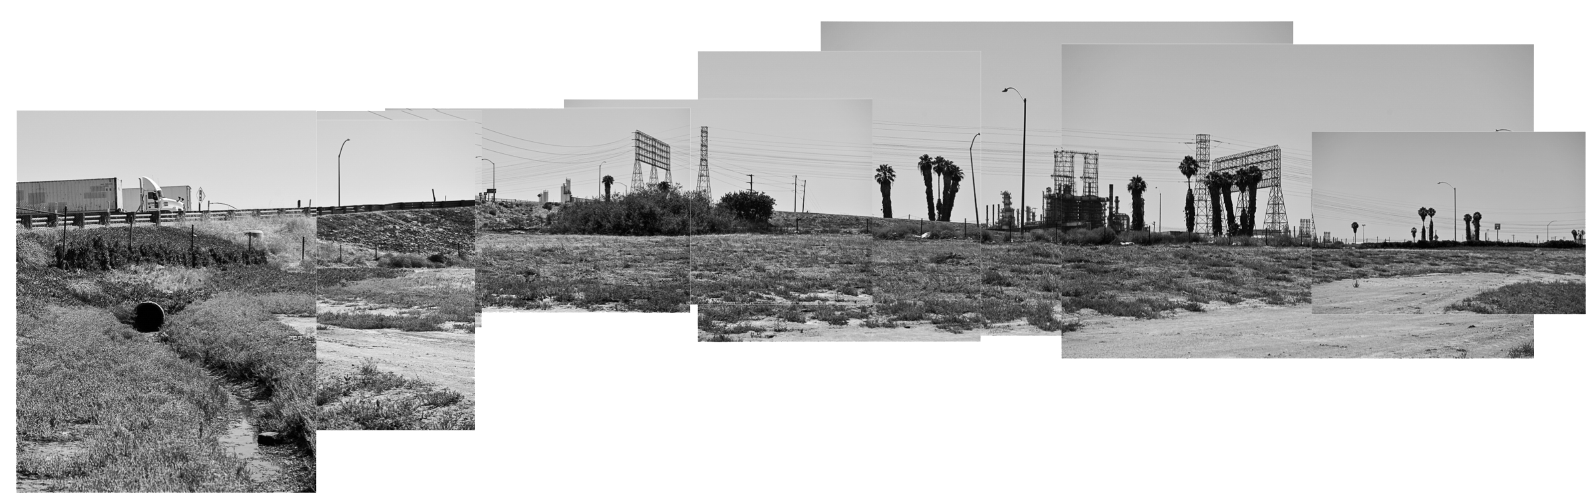 Black and white panoramic image made from multiple photos of land next to a highway with palm trees in the distance